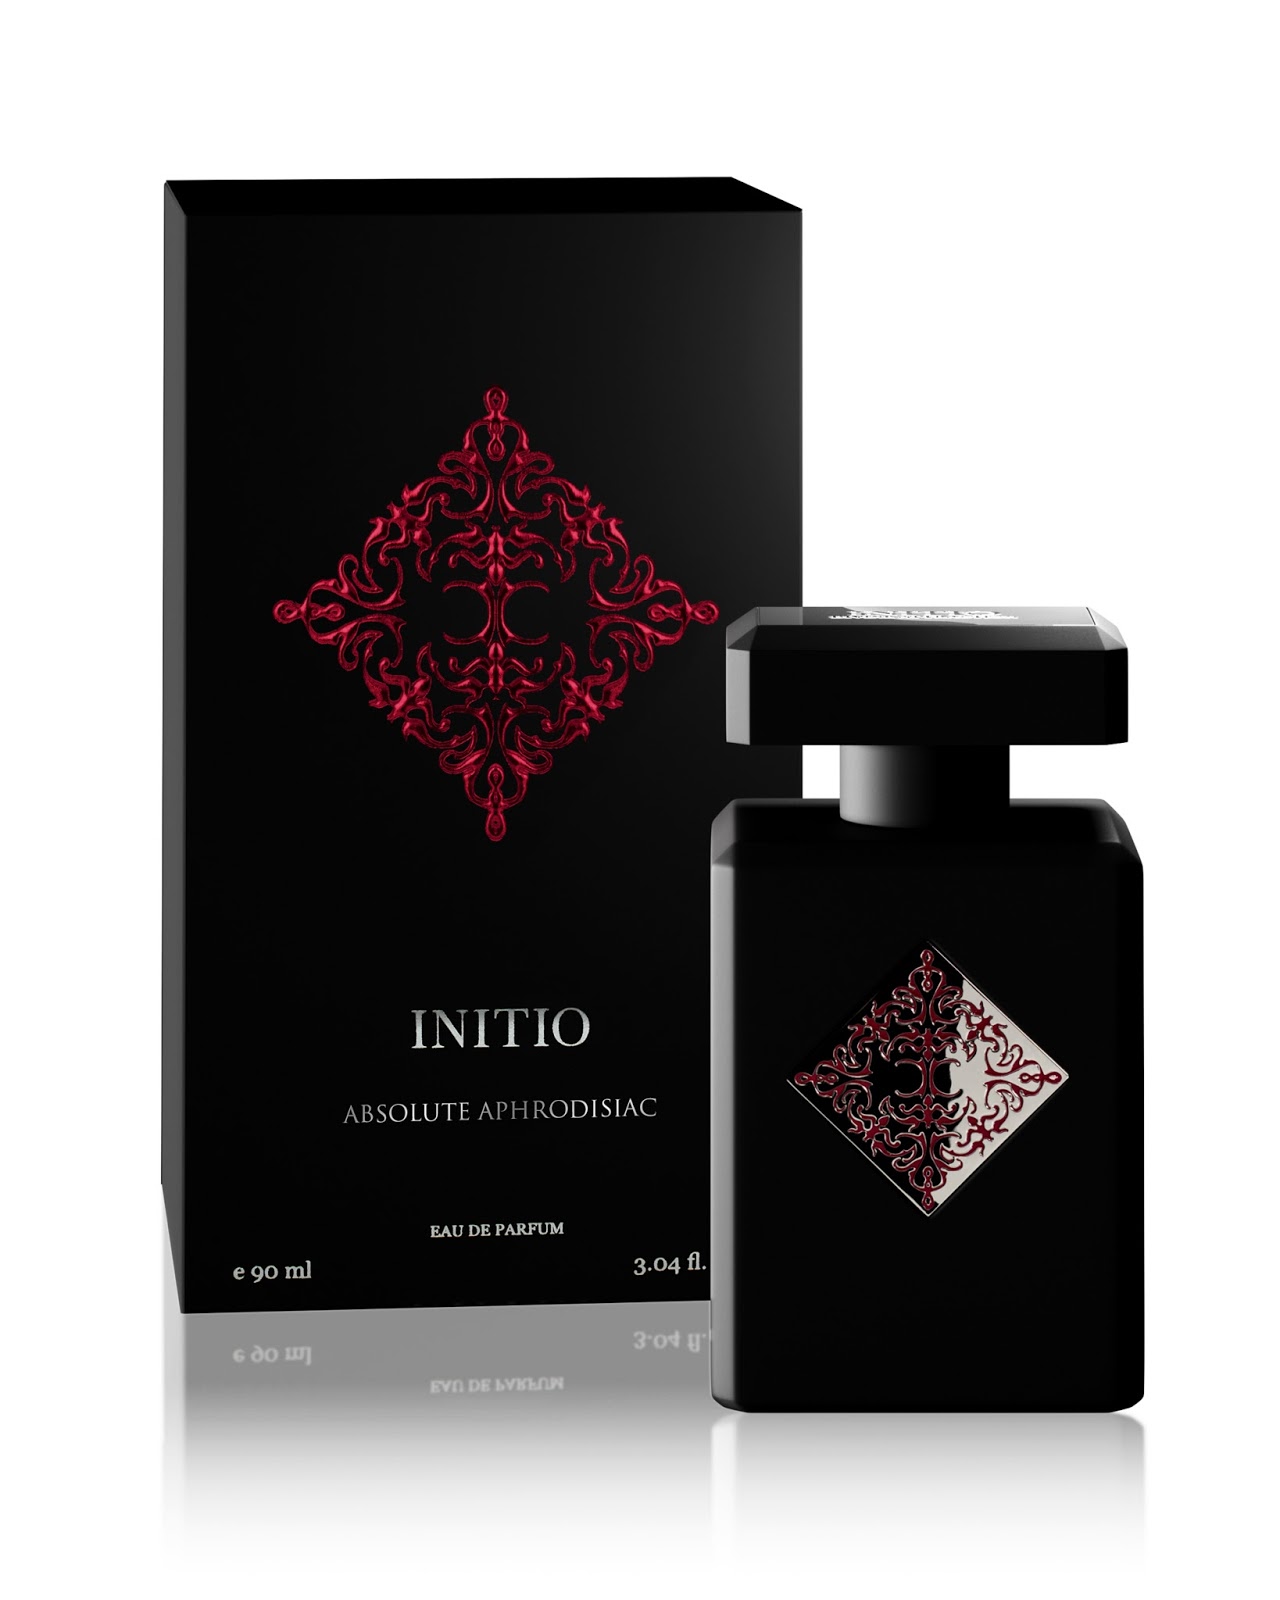 Absolute Aphrodisiac Initio Parfums Prives for women and men.jpg